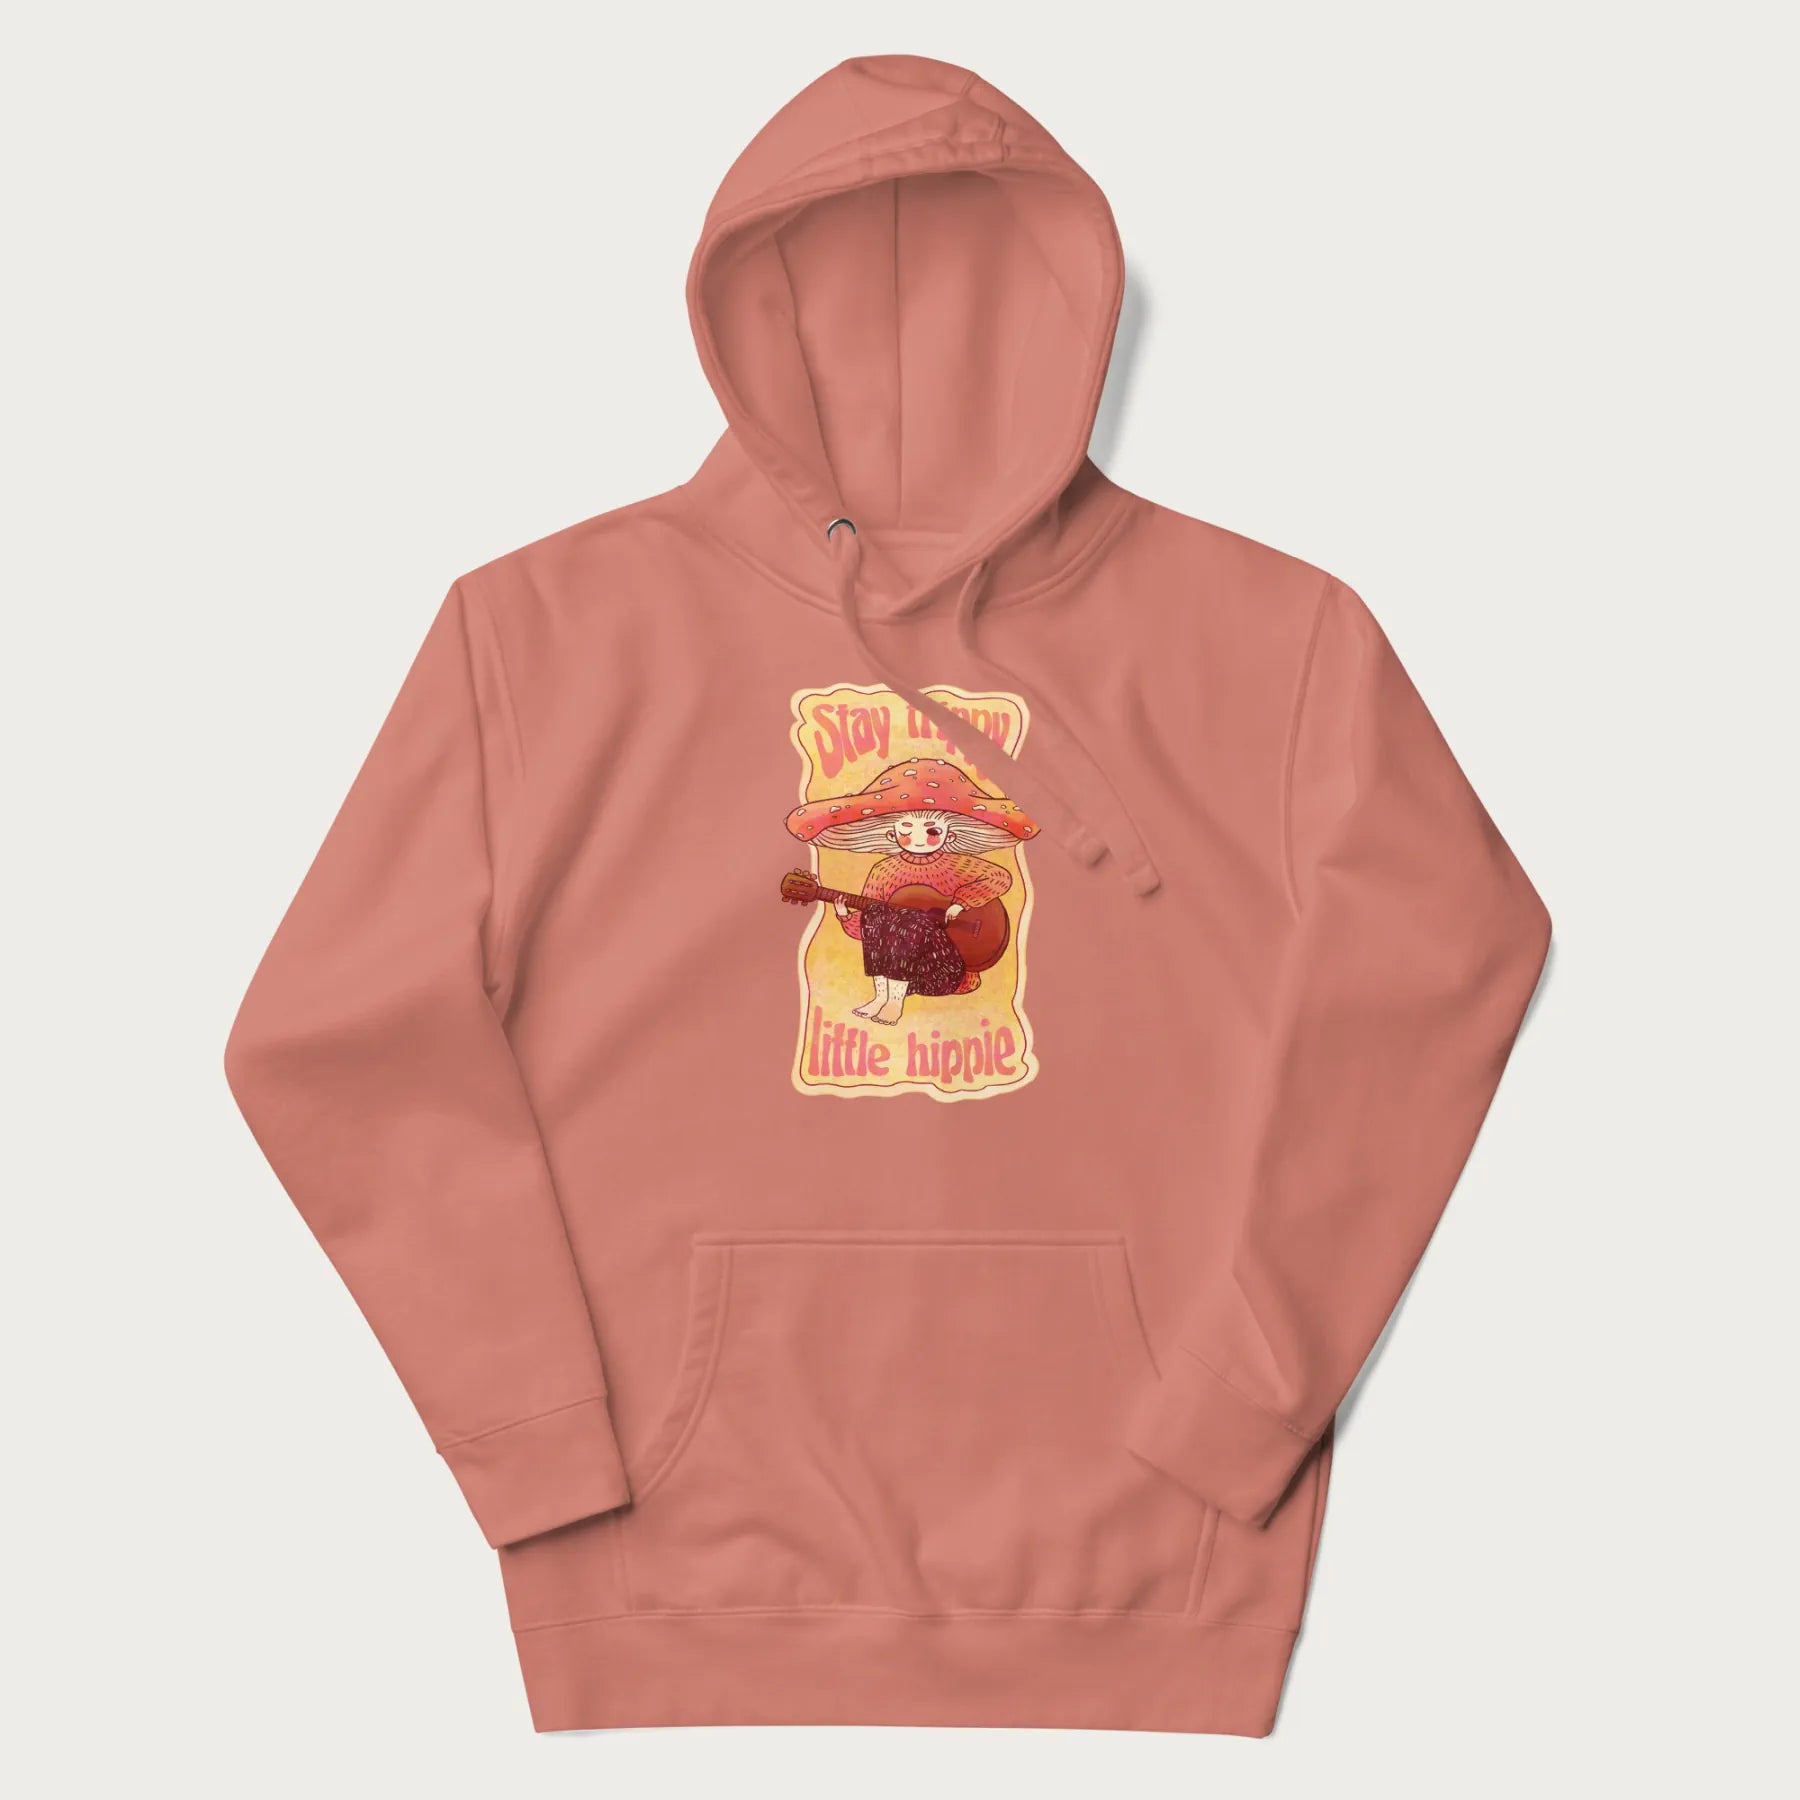 Light pink hoodie with a graphic of a character with a mushroom cap playing a guitar and the text 'Stay Trippy Little Hippie.'